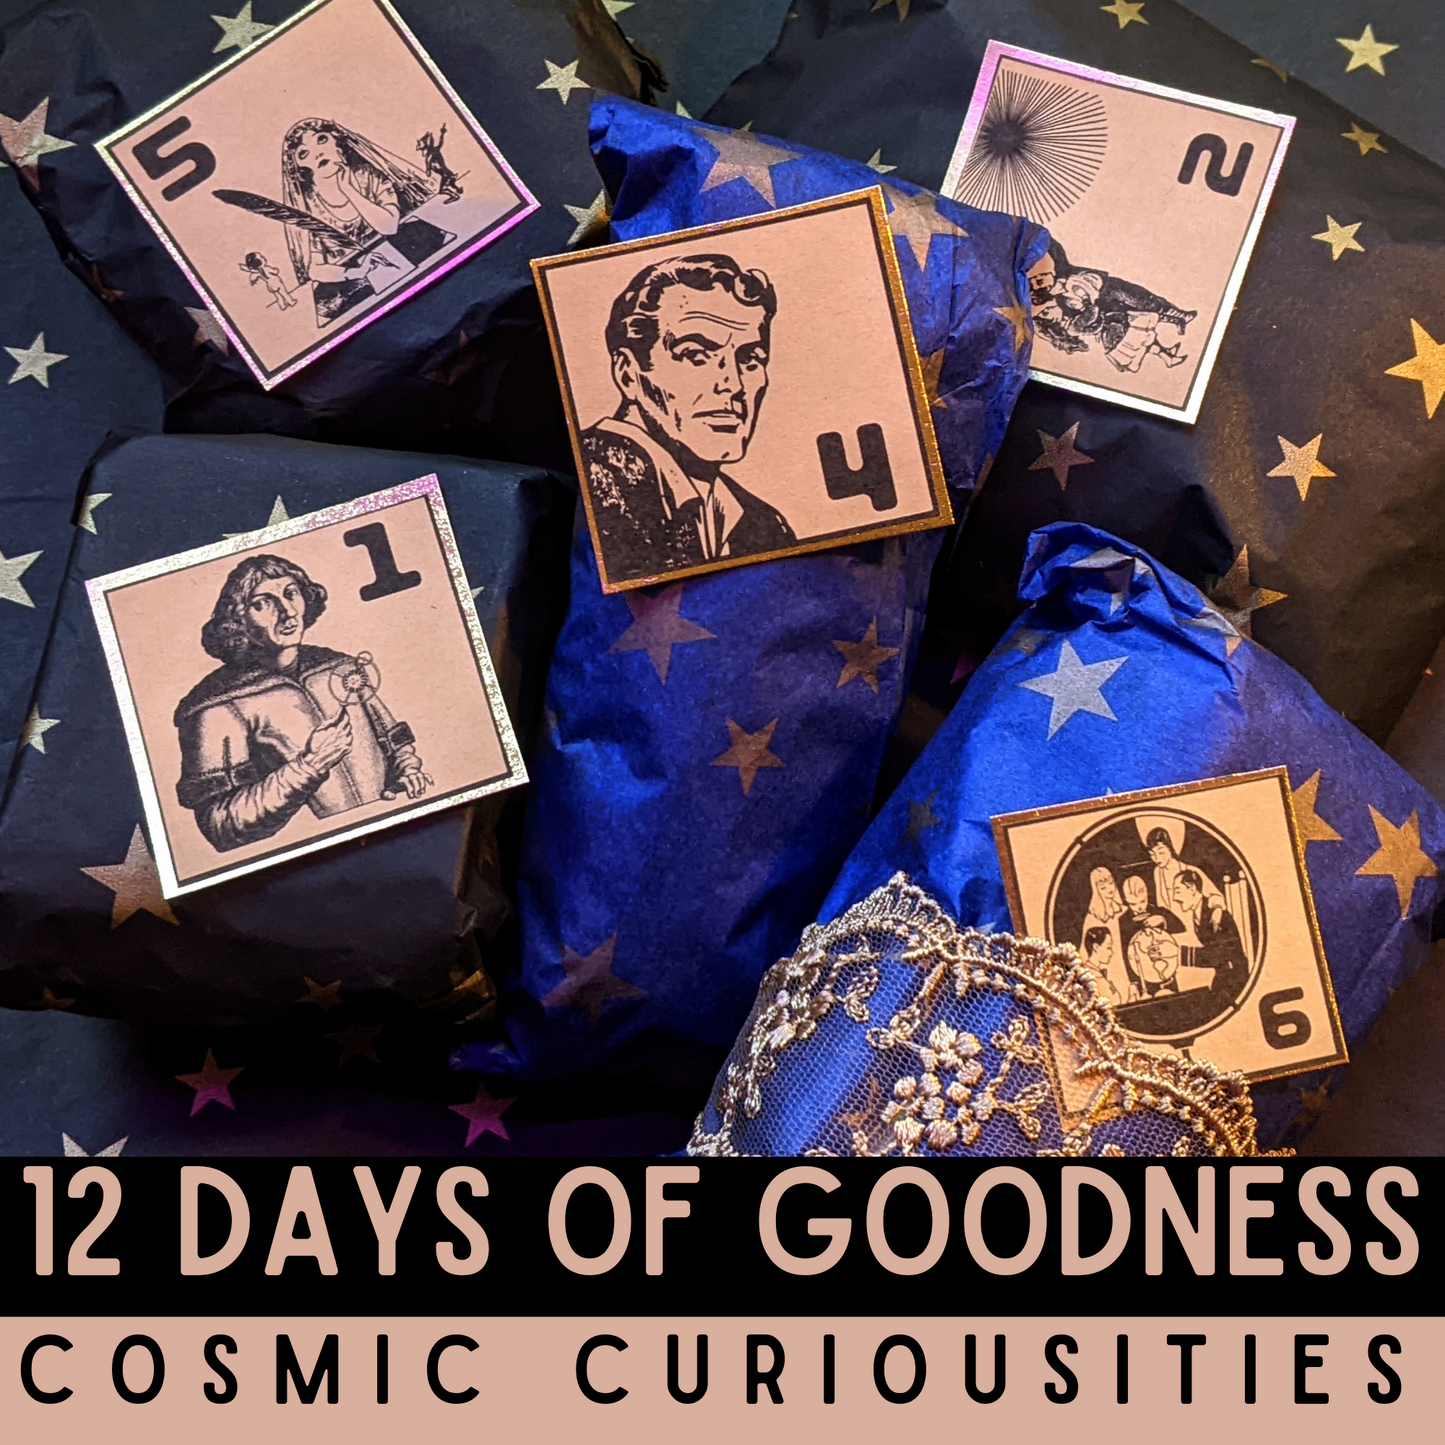 Cosmic Curiosities Astropack / Planetary Mystery Pack (7 or 12 Day Countdown) Mystery Box